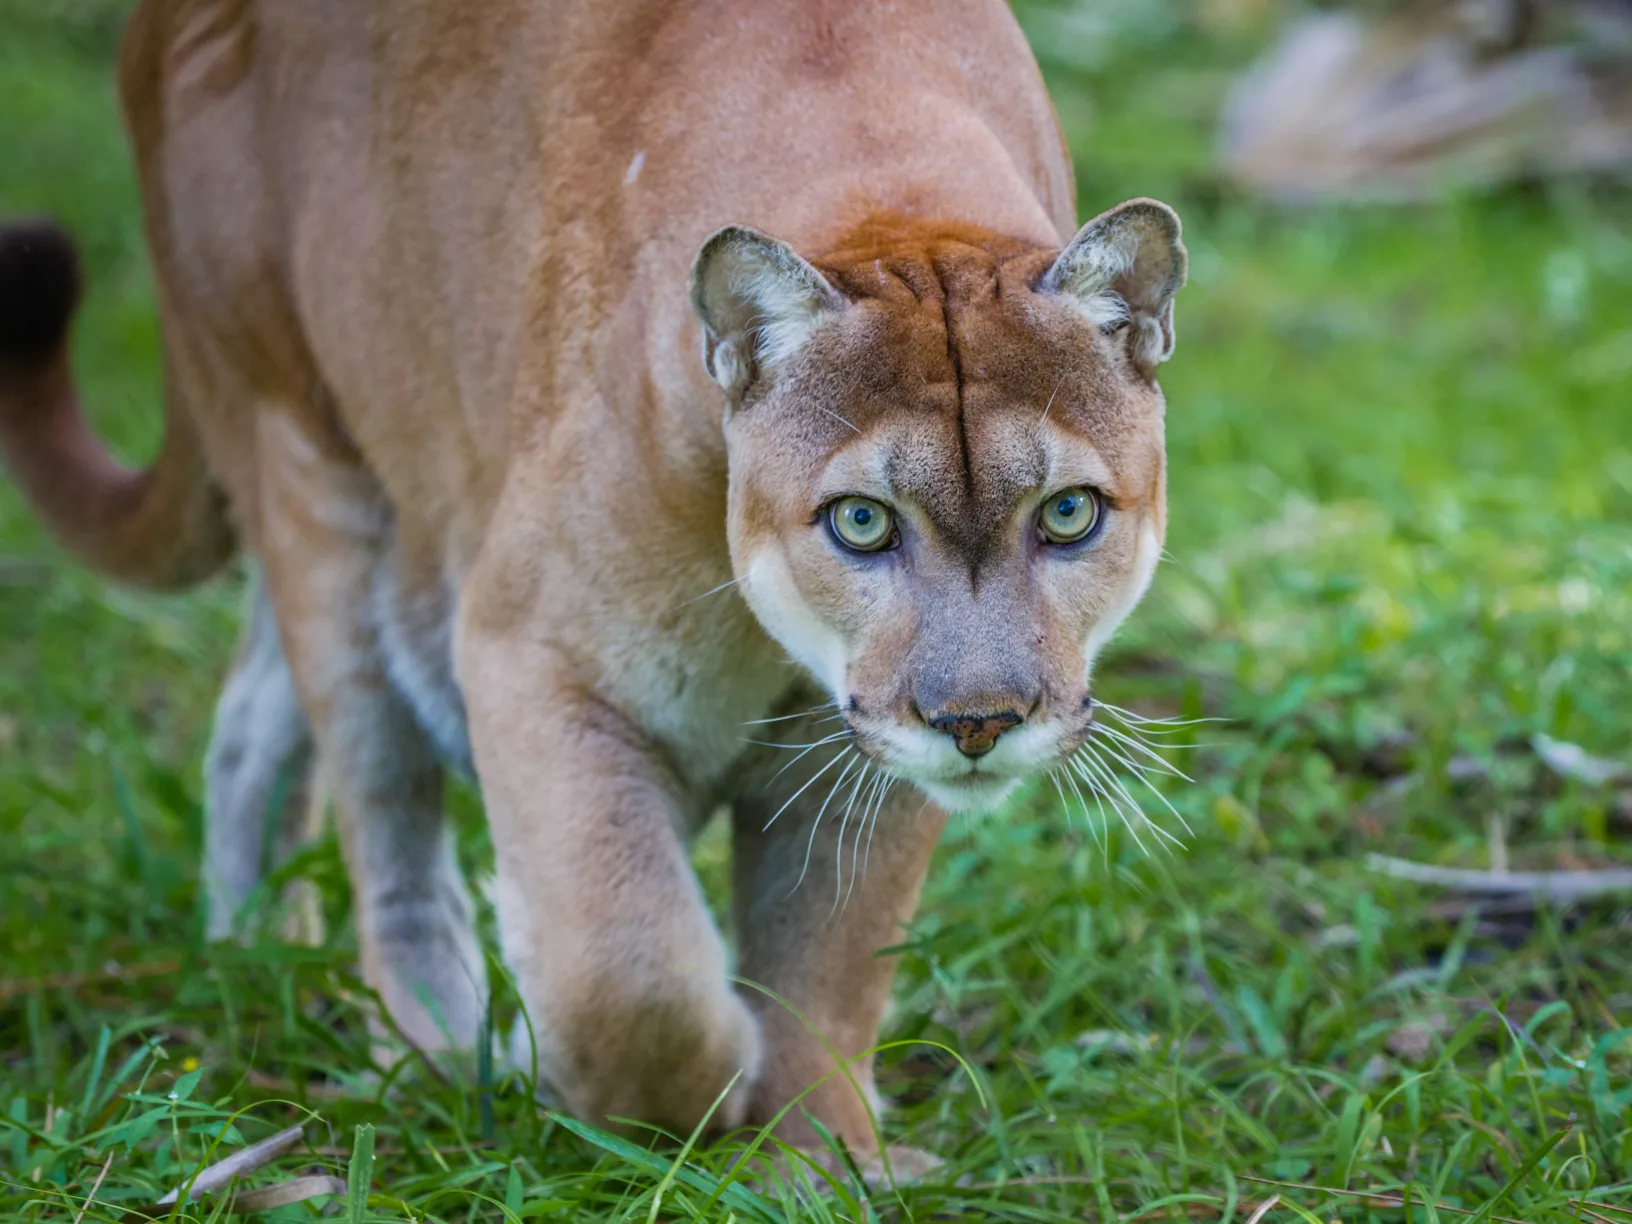 A Florida panther stares directly at the camera with one paw up off the ground